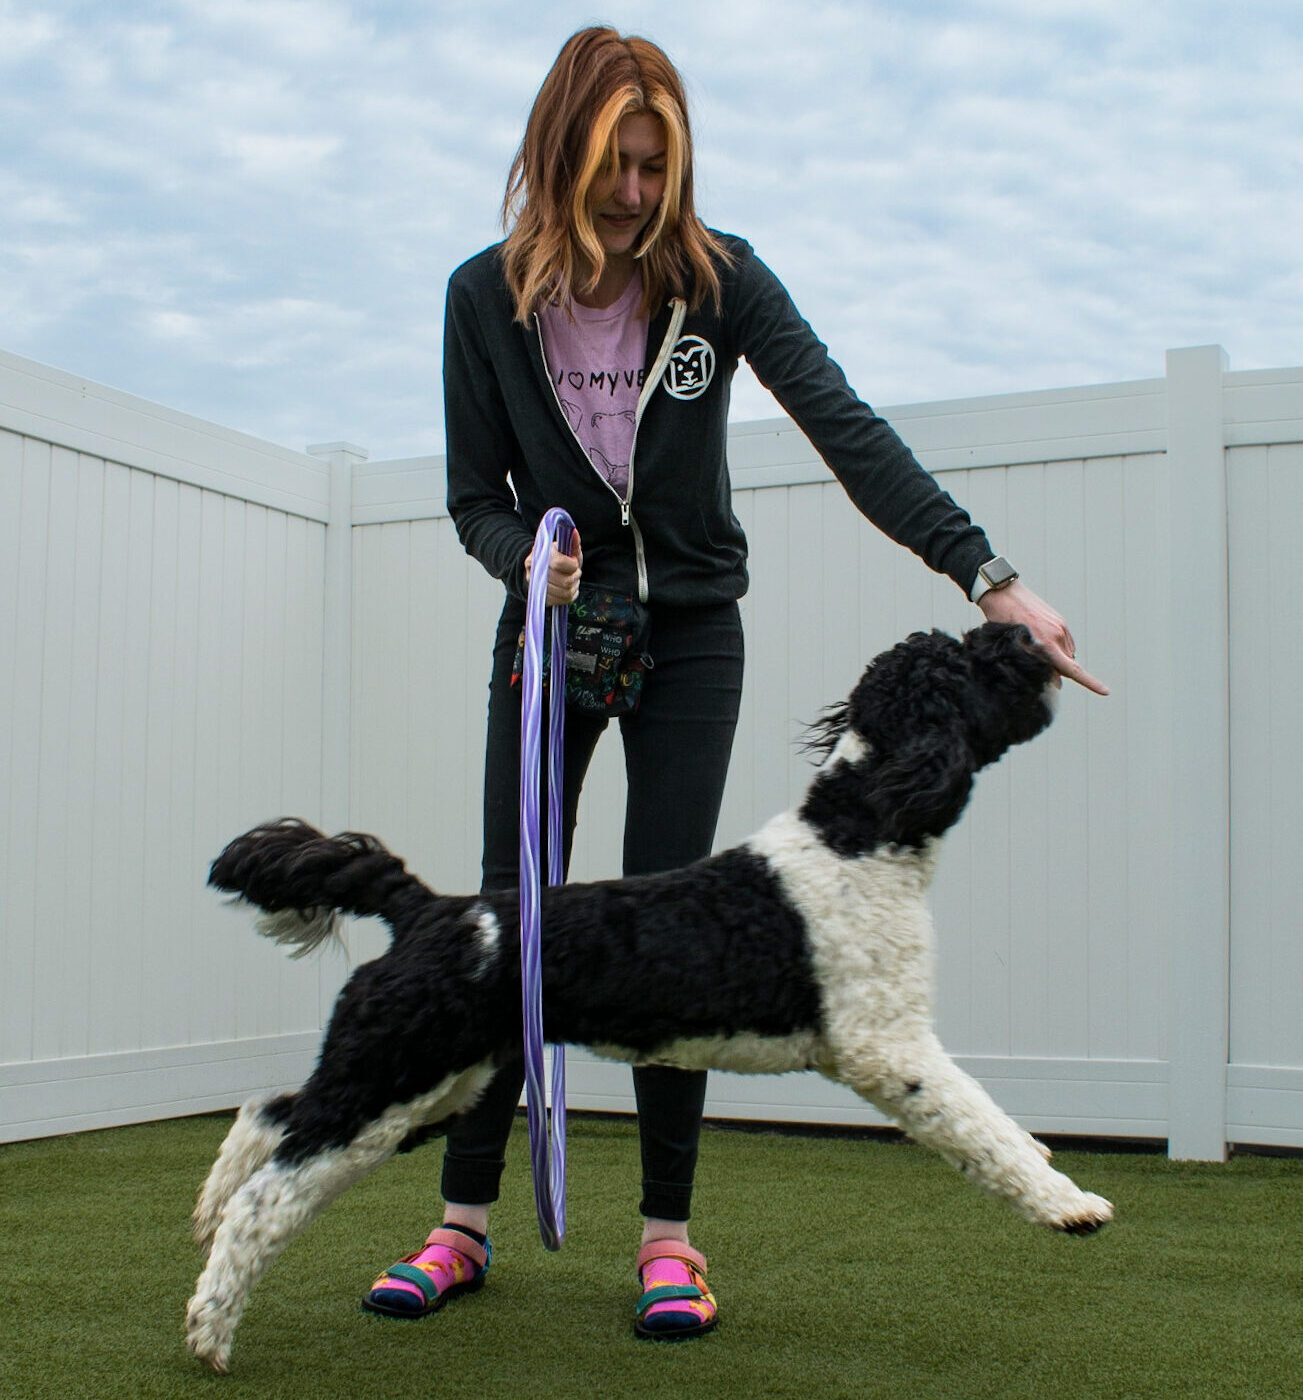 Beth guides Marni a Portuguese Water Dog through a hoop during a Trick of the Month session.